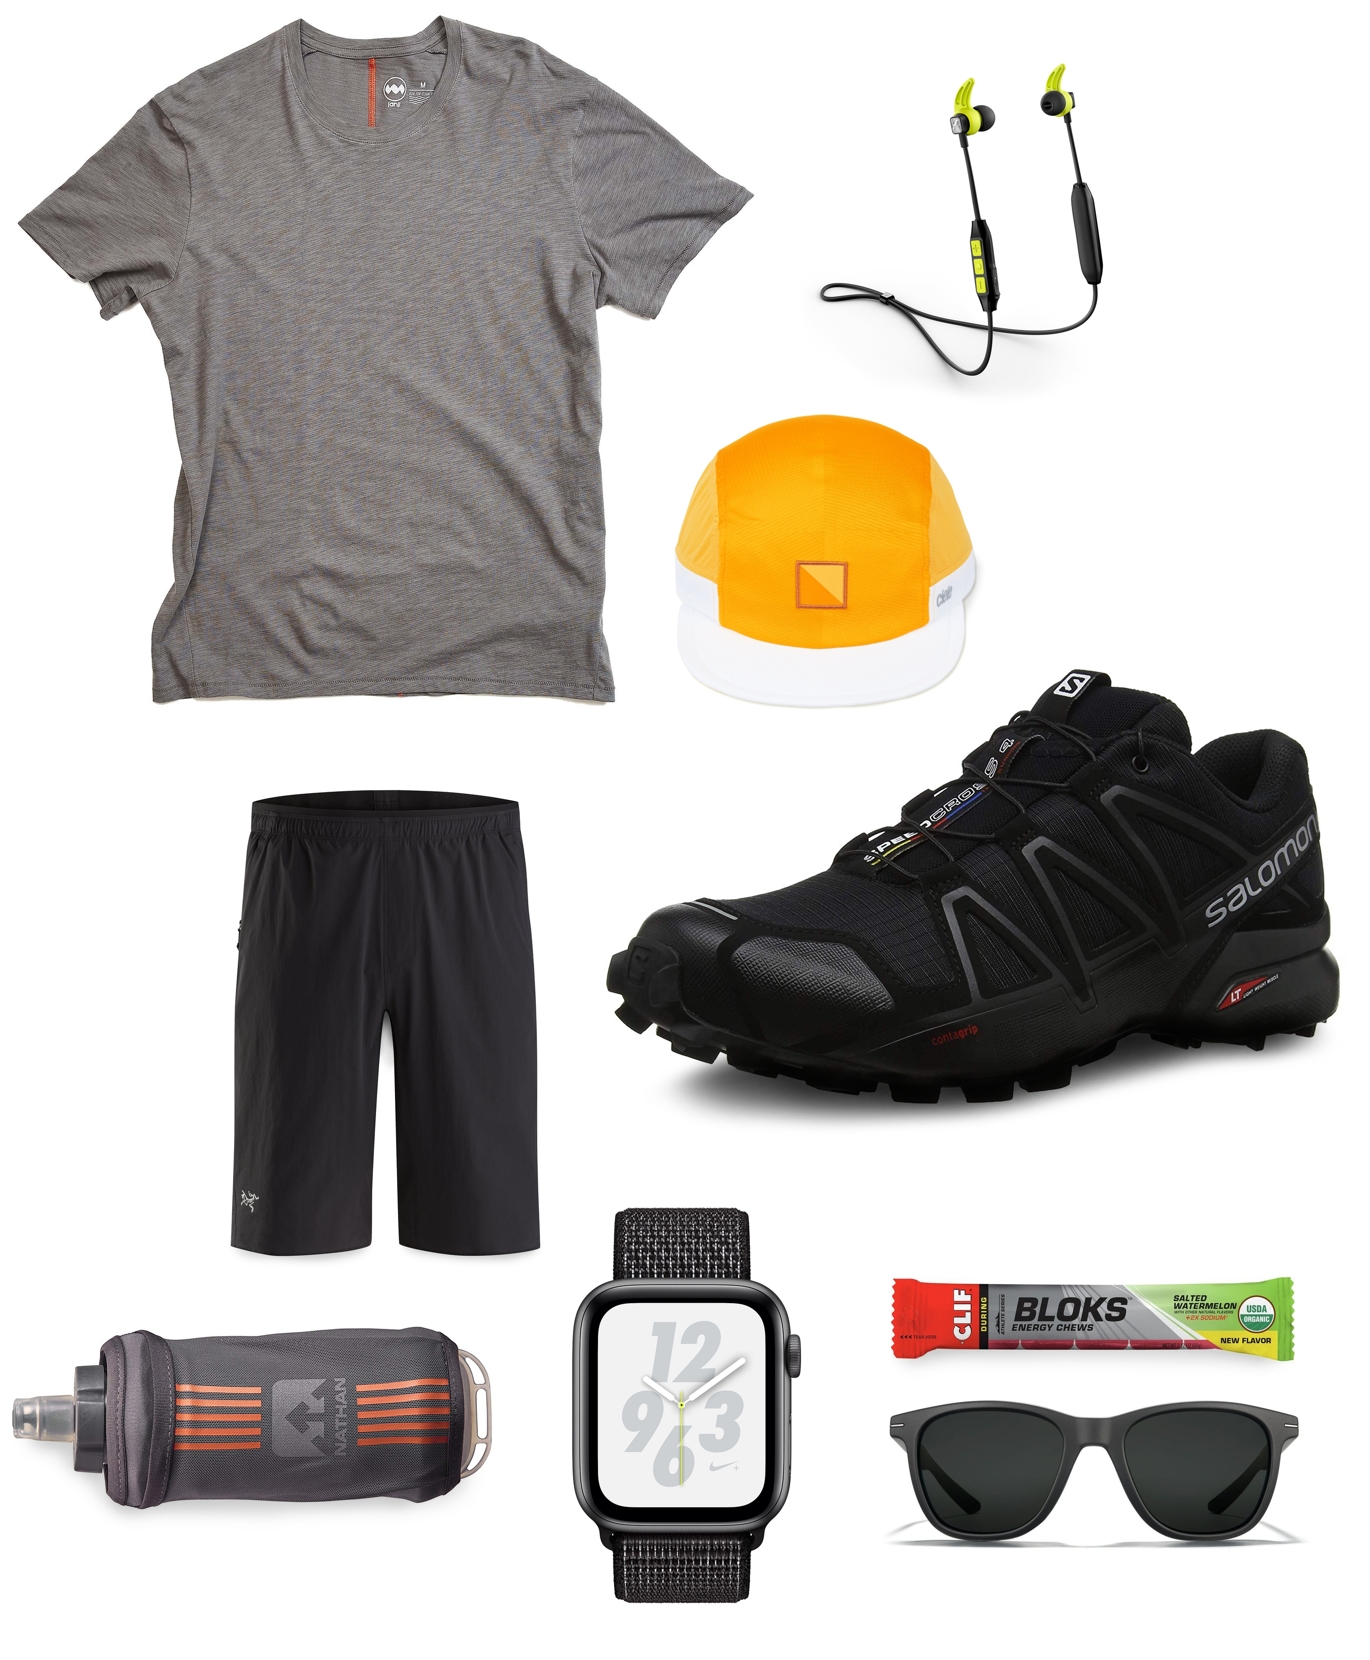 Men's trail running outfit inspiration